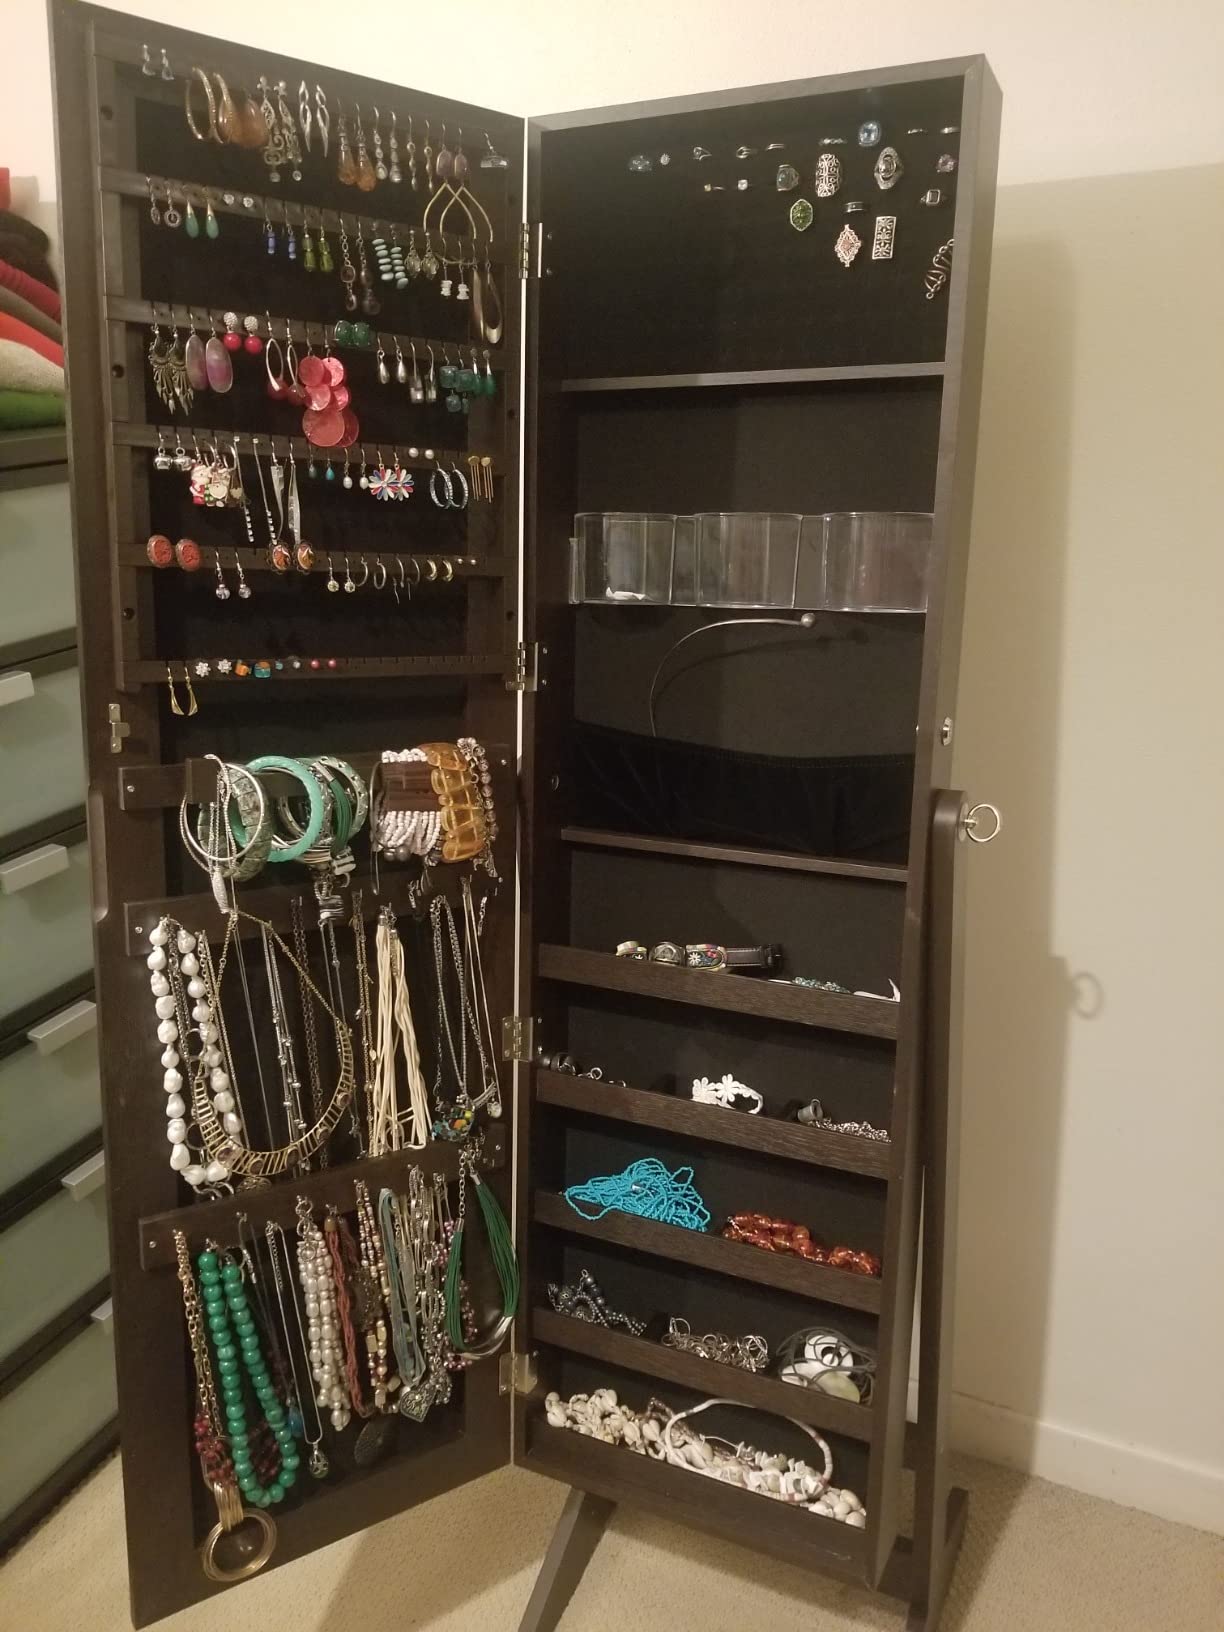 Needs more necklace space!